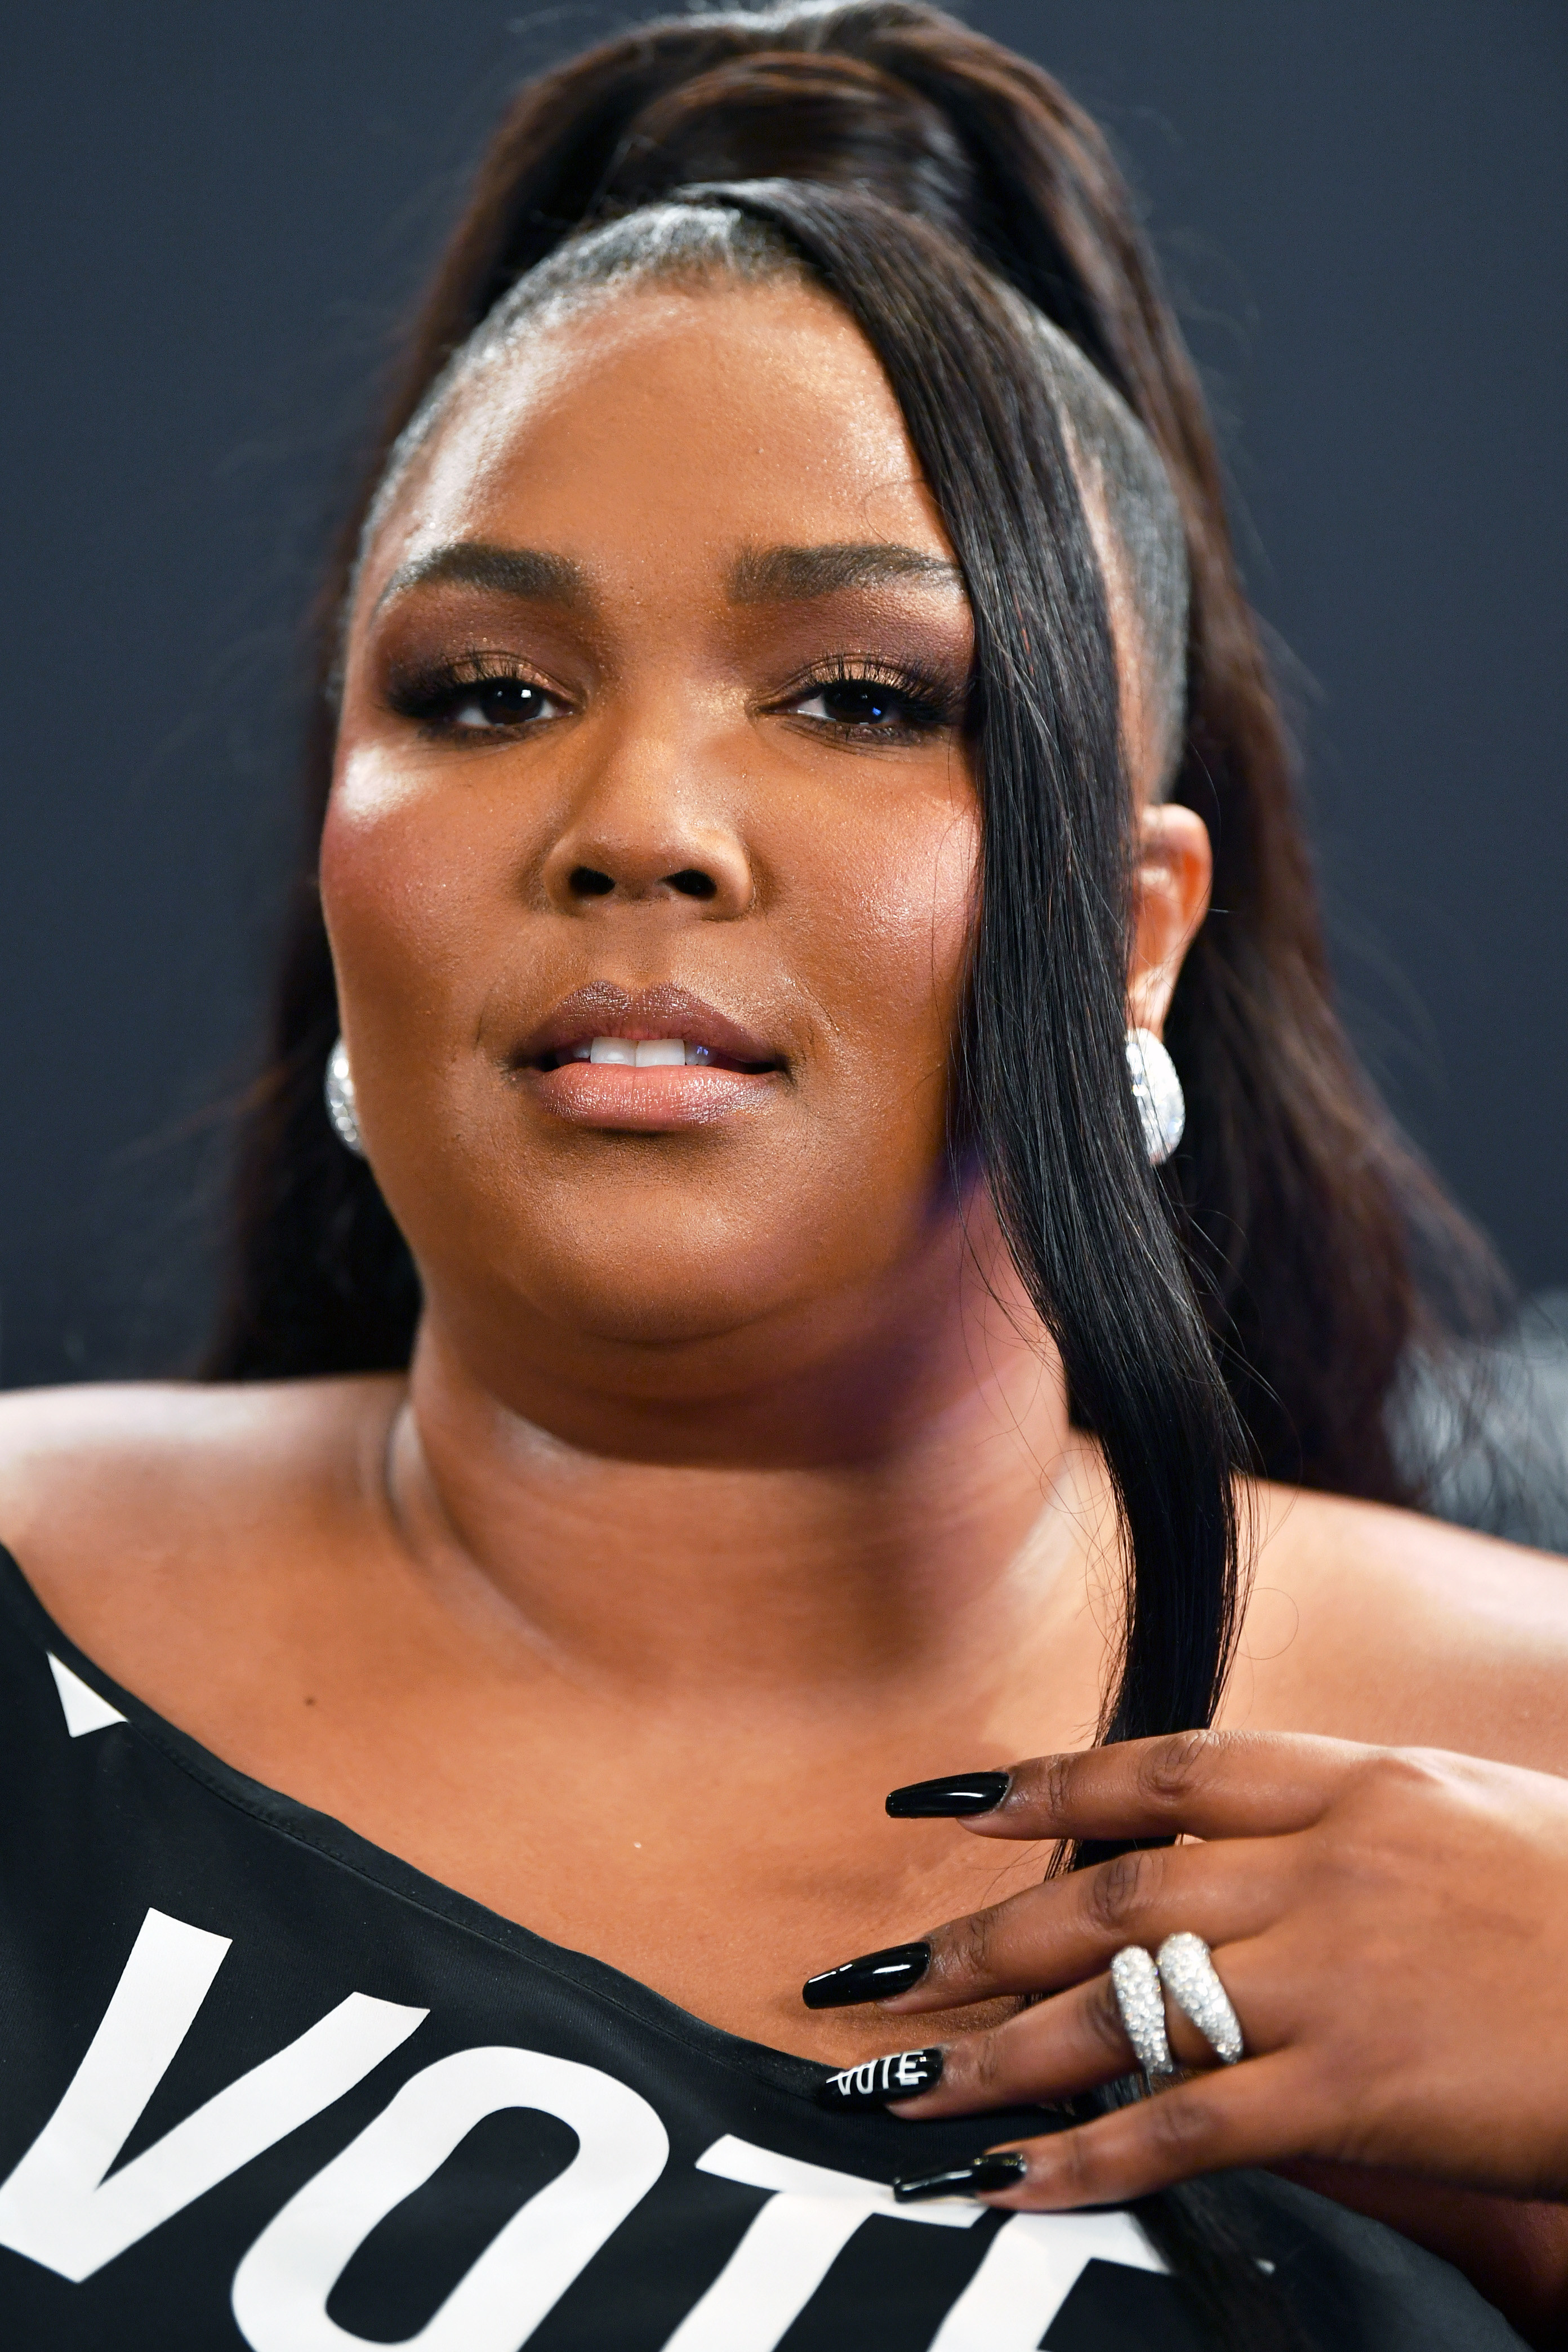 Lizzo showing off her manicure which has &#x27;Vote&#x27; written on one of her nails